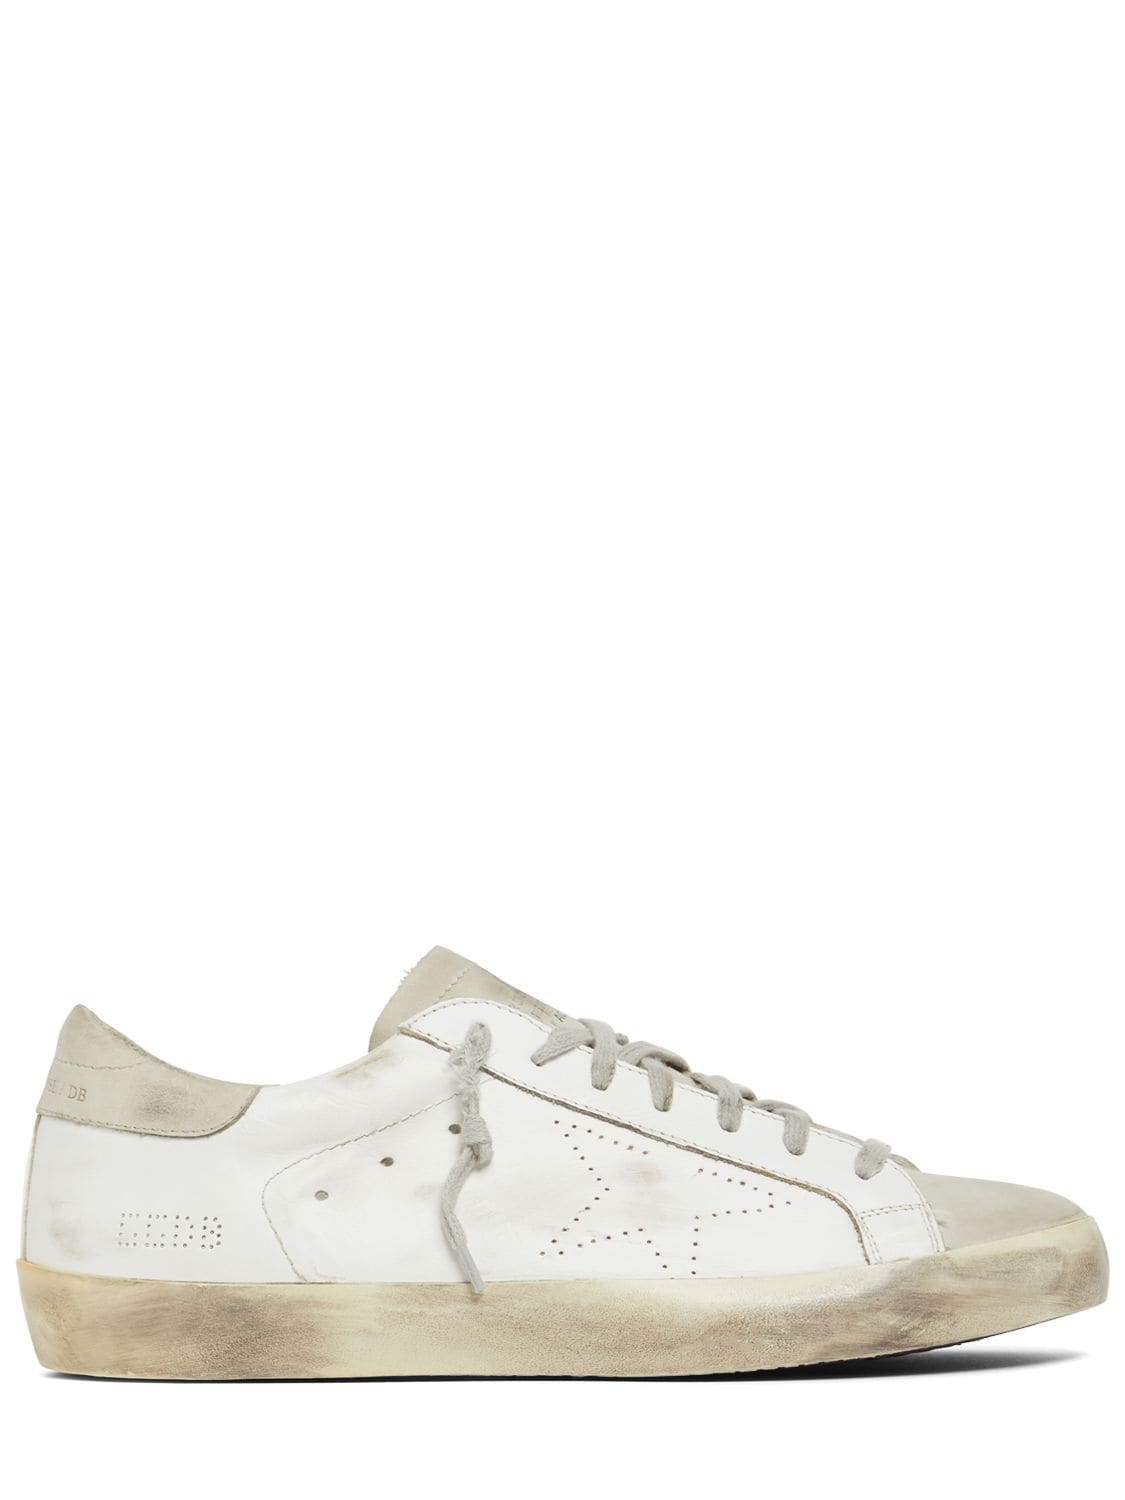 Golden Goose Super Star Leather Sneakers In White,ice